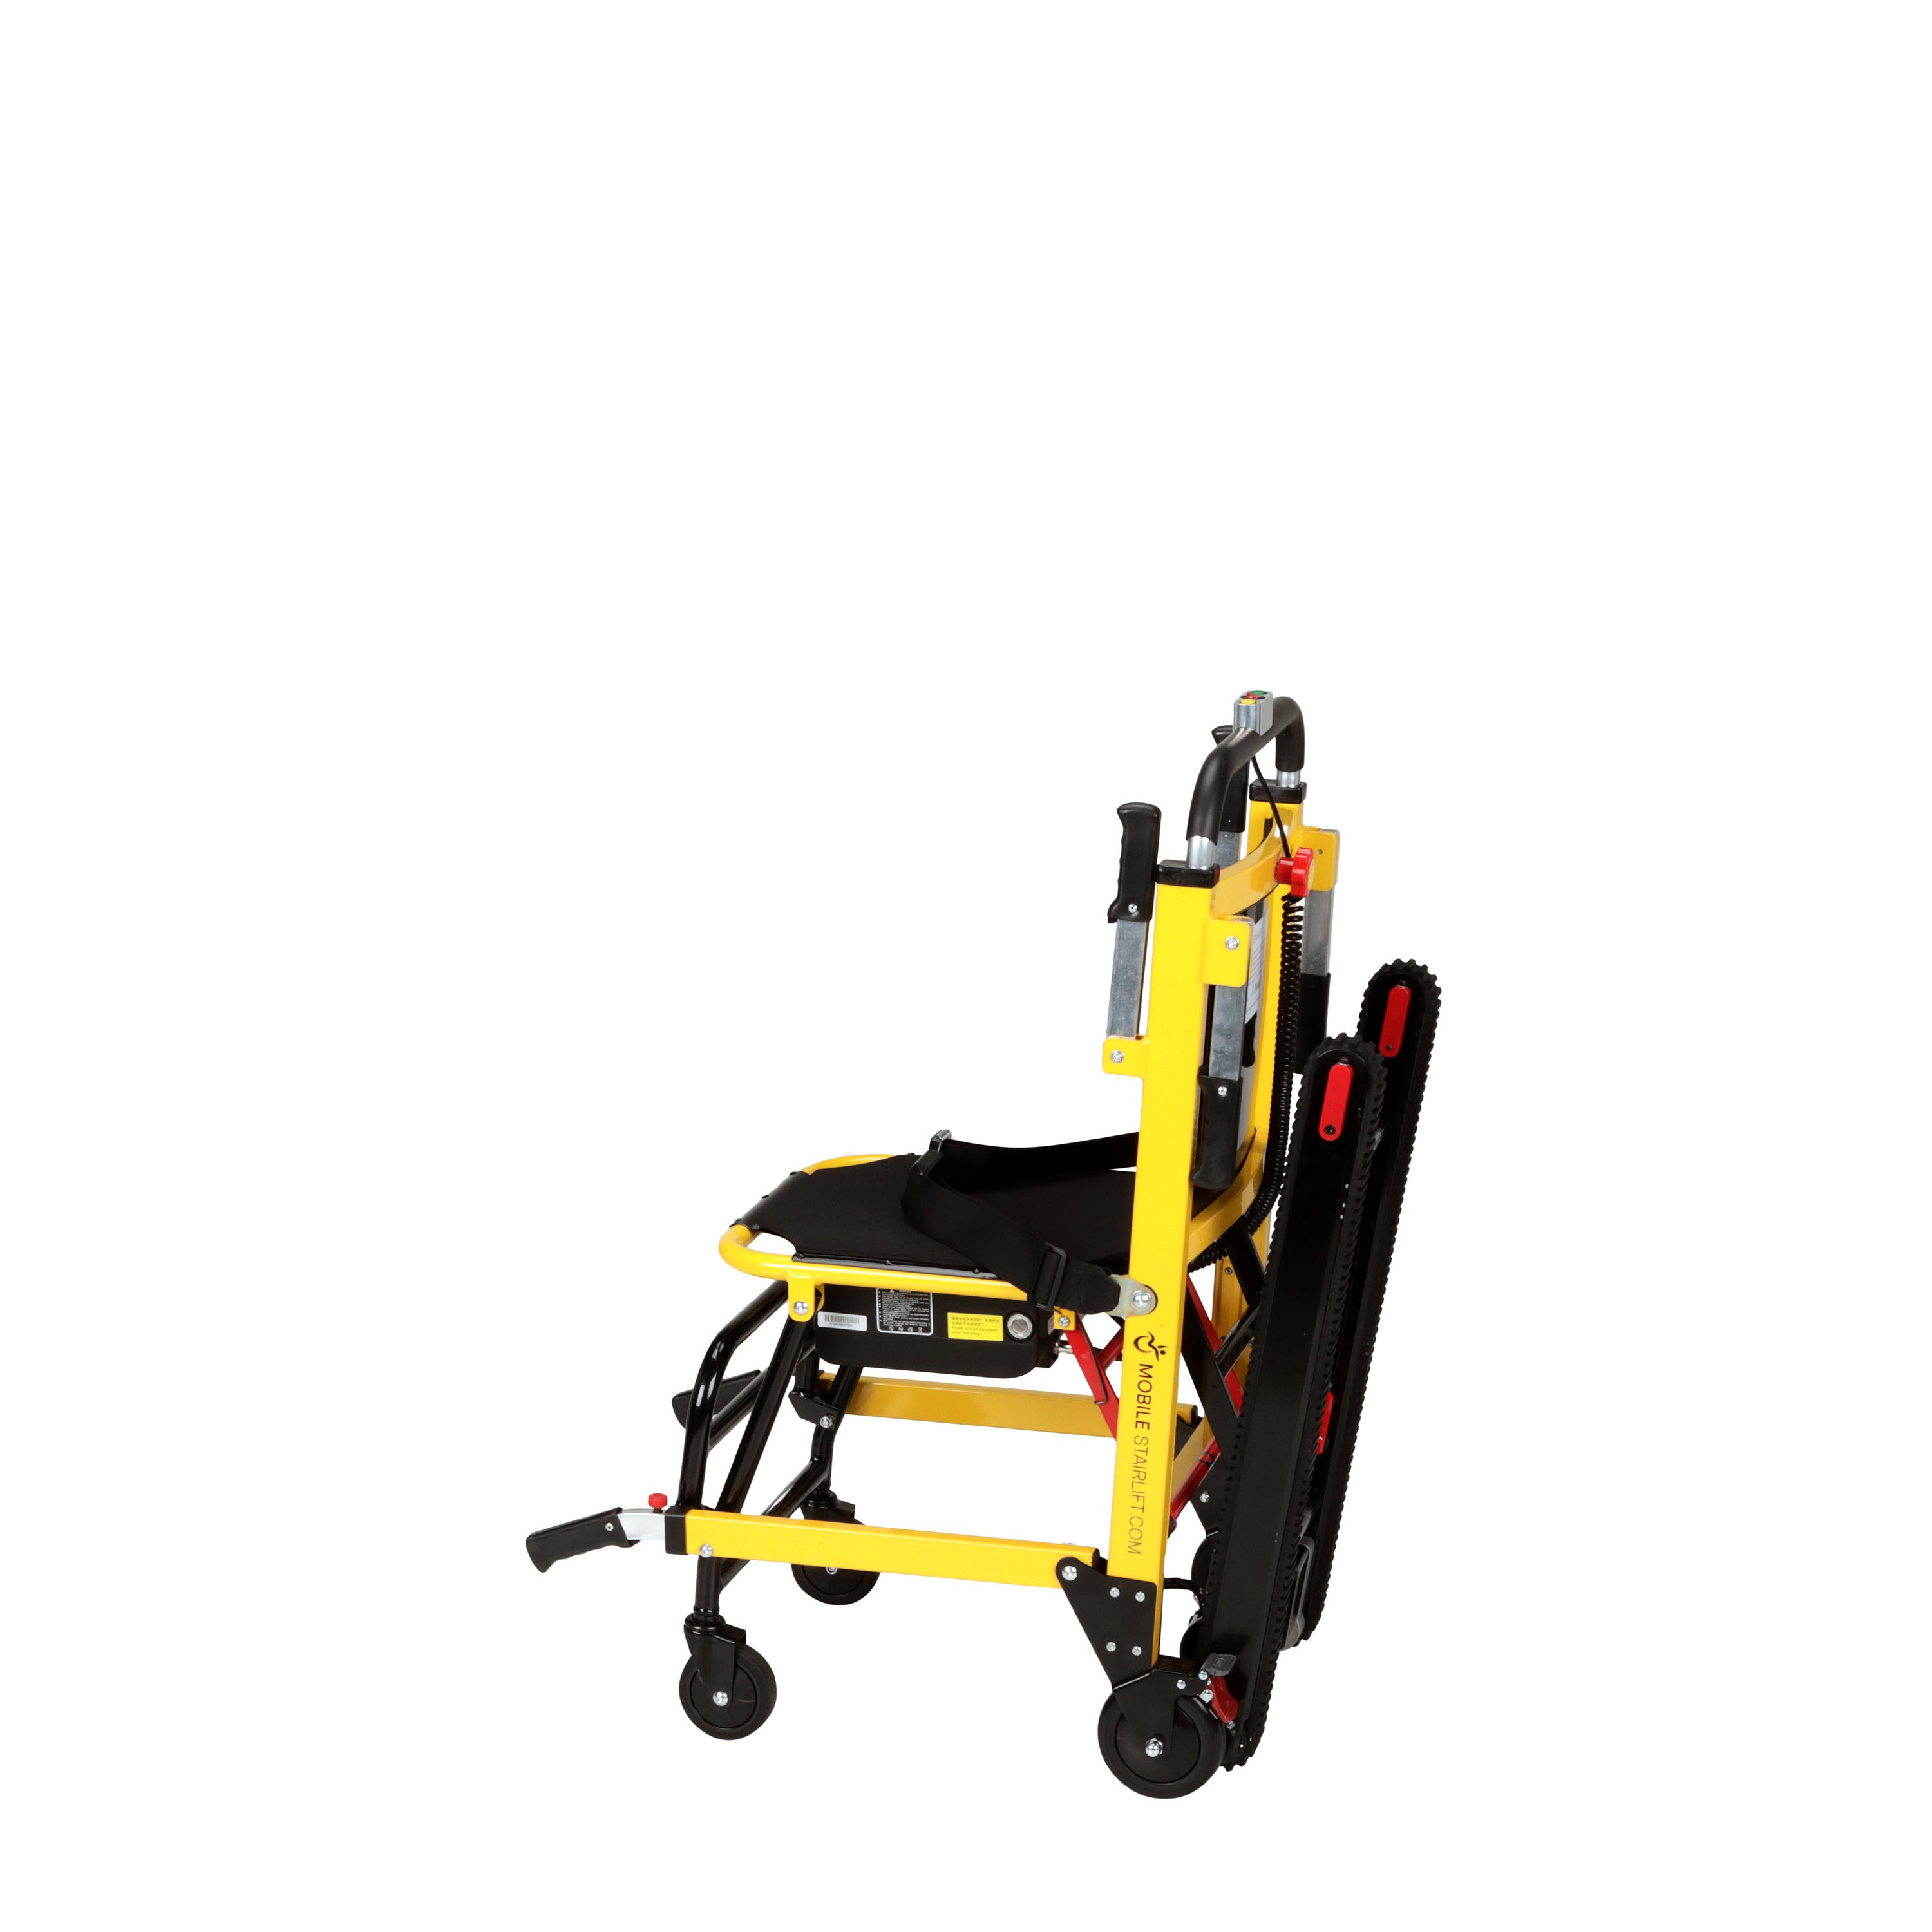 Climbing Steps Genesis Mobile Stairlift Stair Lift Climbing Steps   